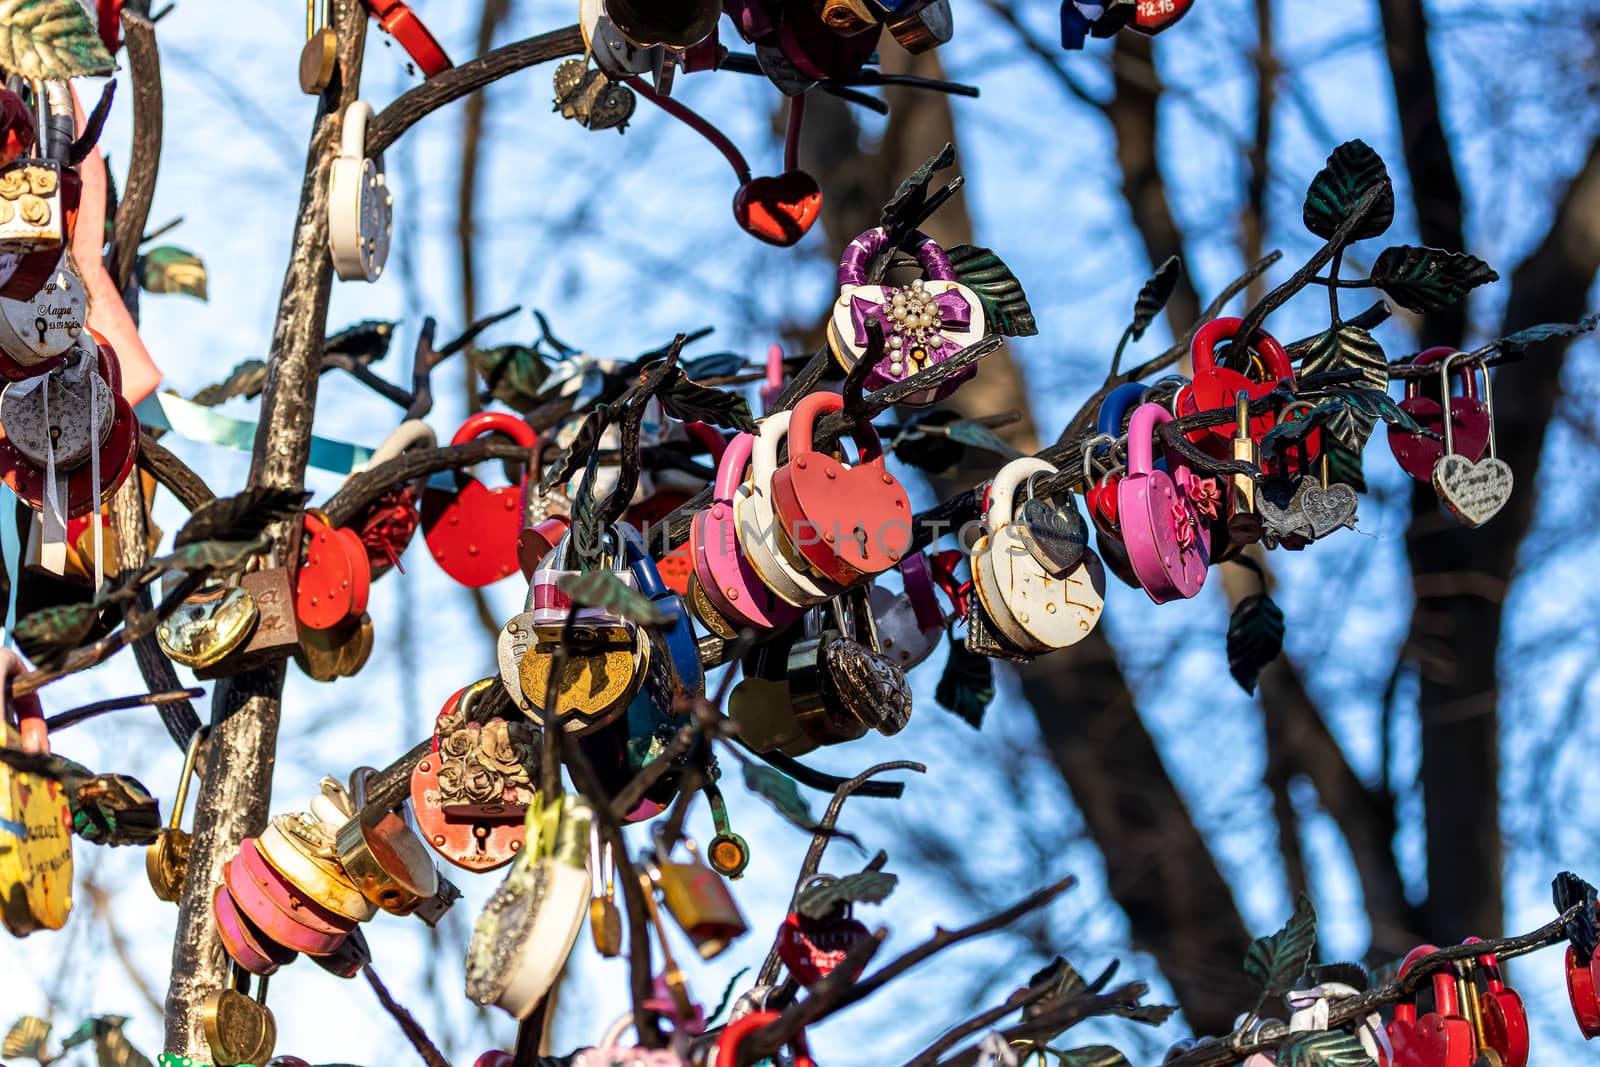 Many wedding colorful locks on a wedding tree. Symbol of love, marriage and happiness.